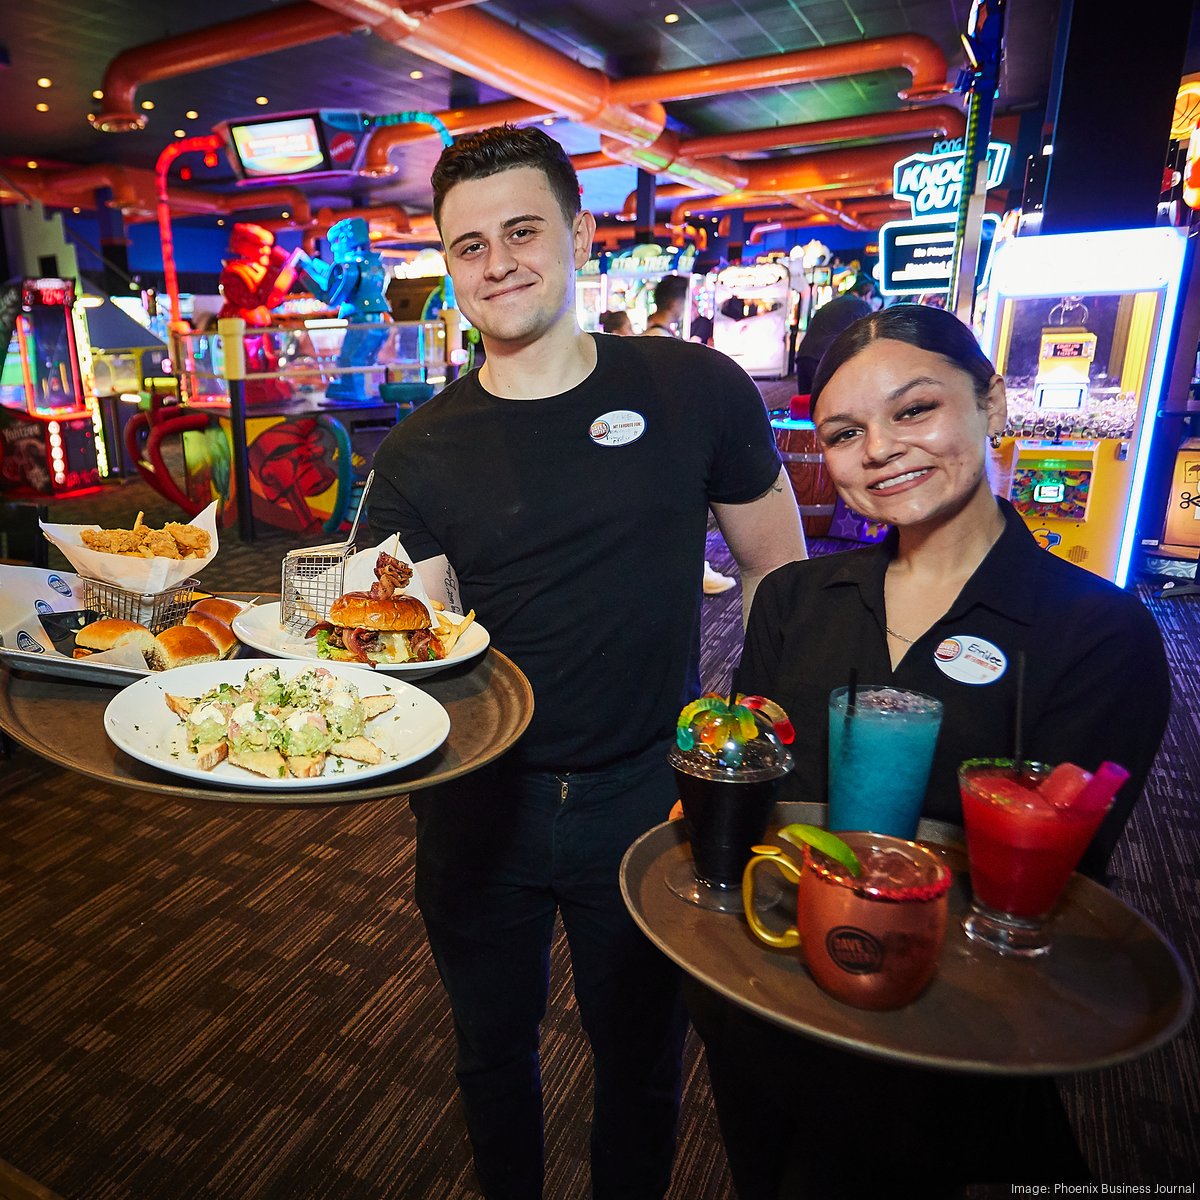 Dave & Buster's hiring 180 positions for Lynnwood opening